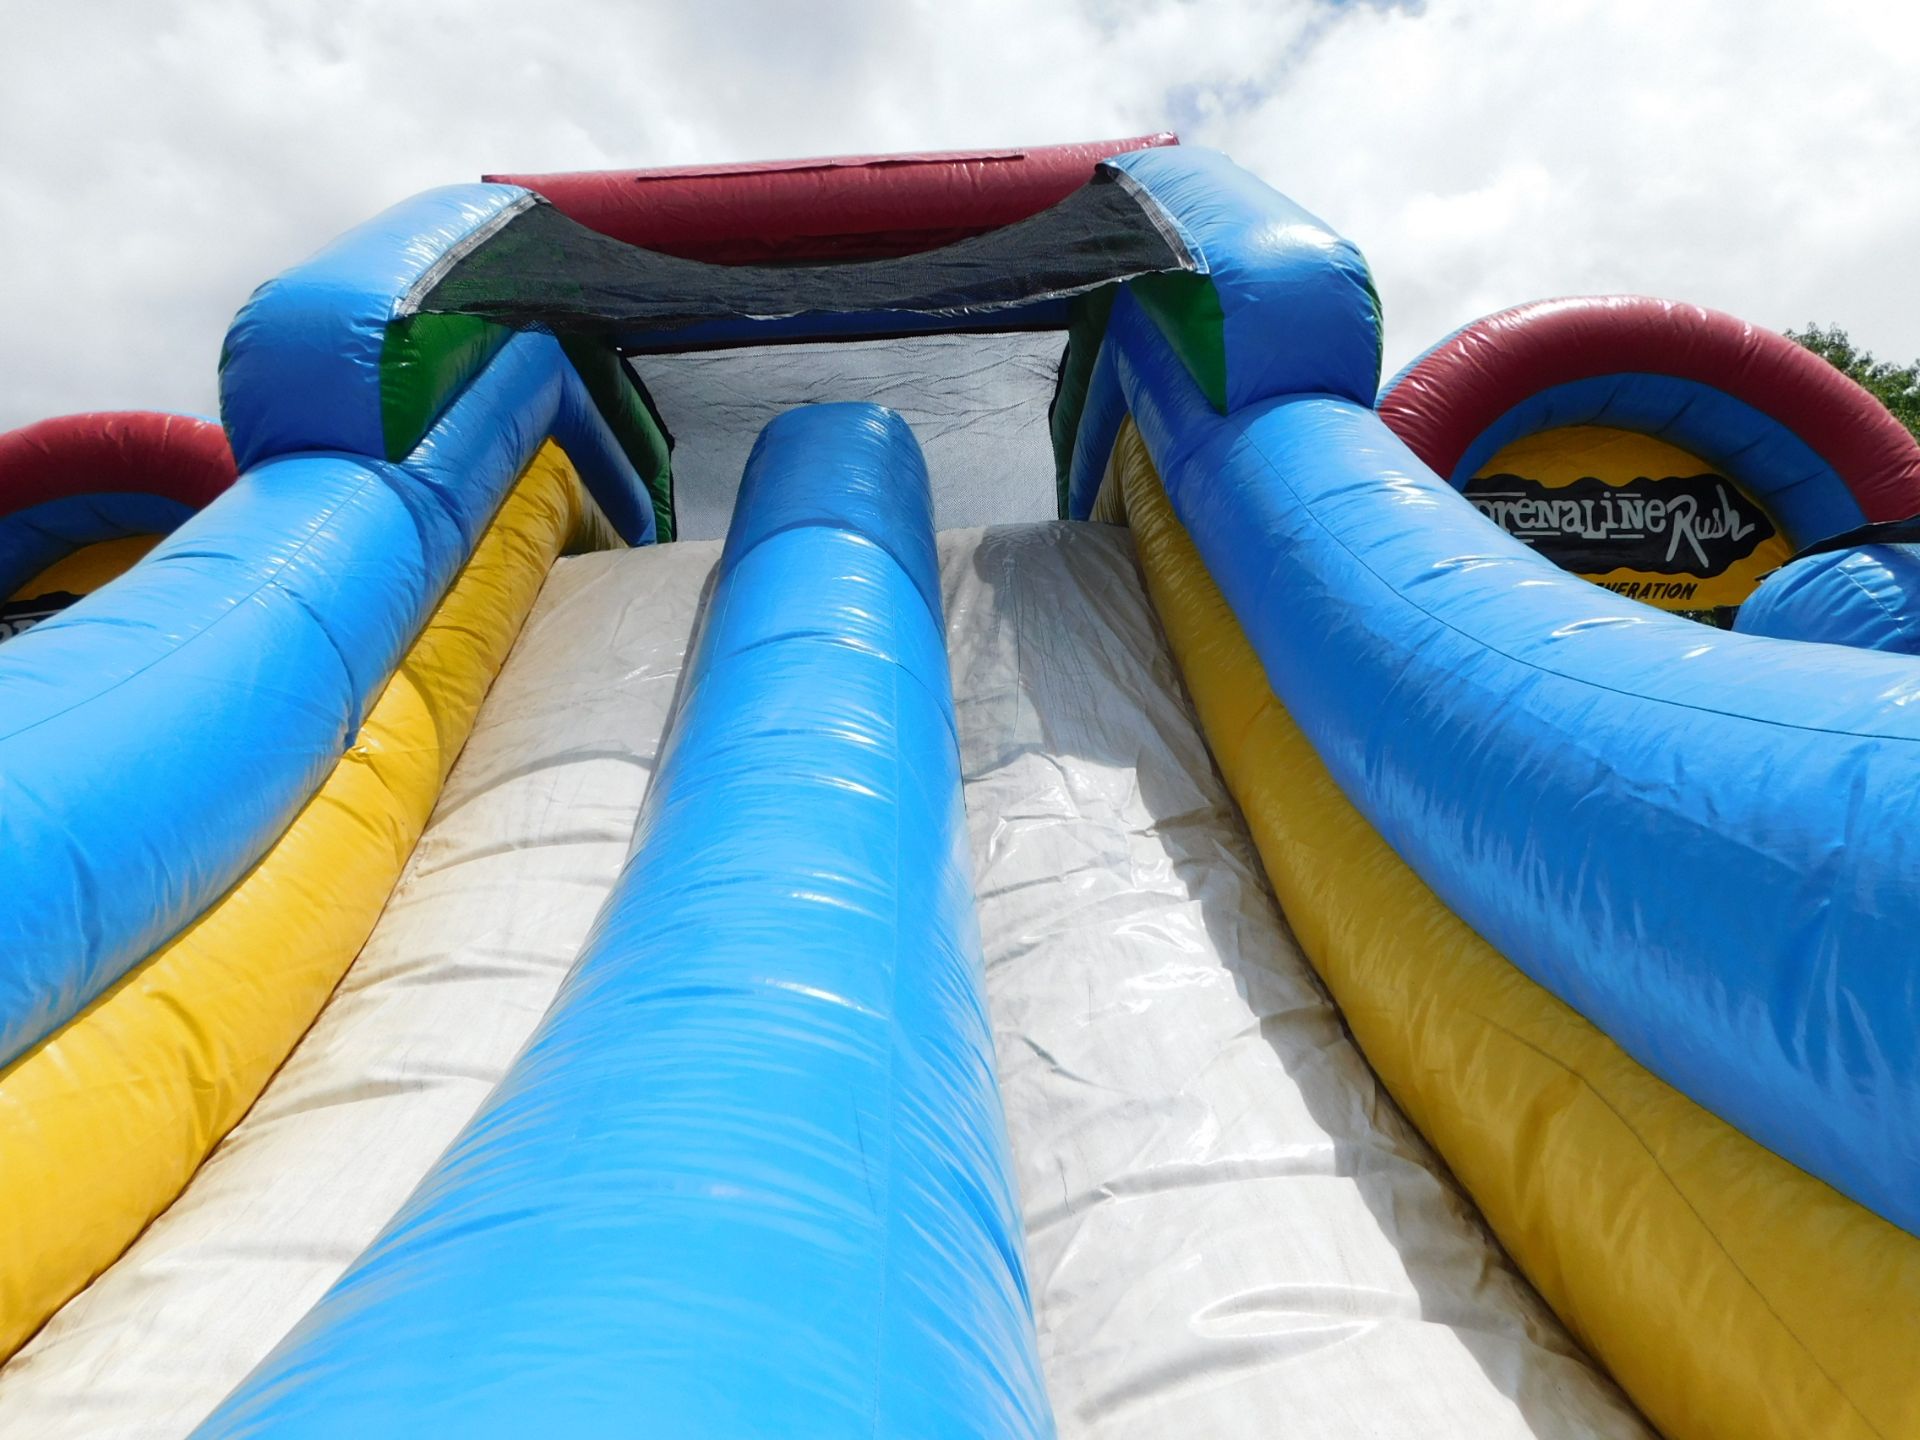 Inflatable Store "Adrenaline Rush" The Next Generation 3 piece Inflatable Obstacle Course, 24'WX34' - Image 14 of 28